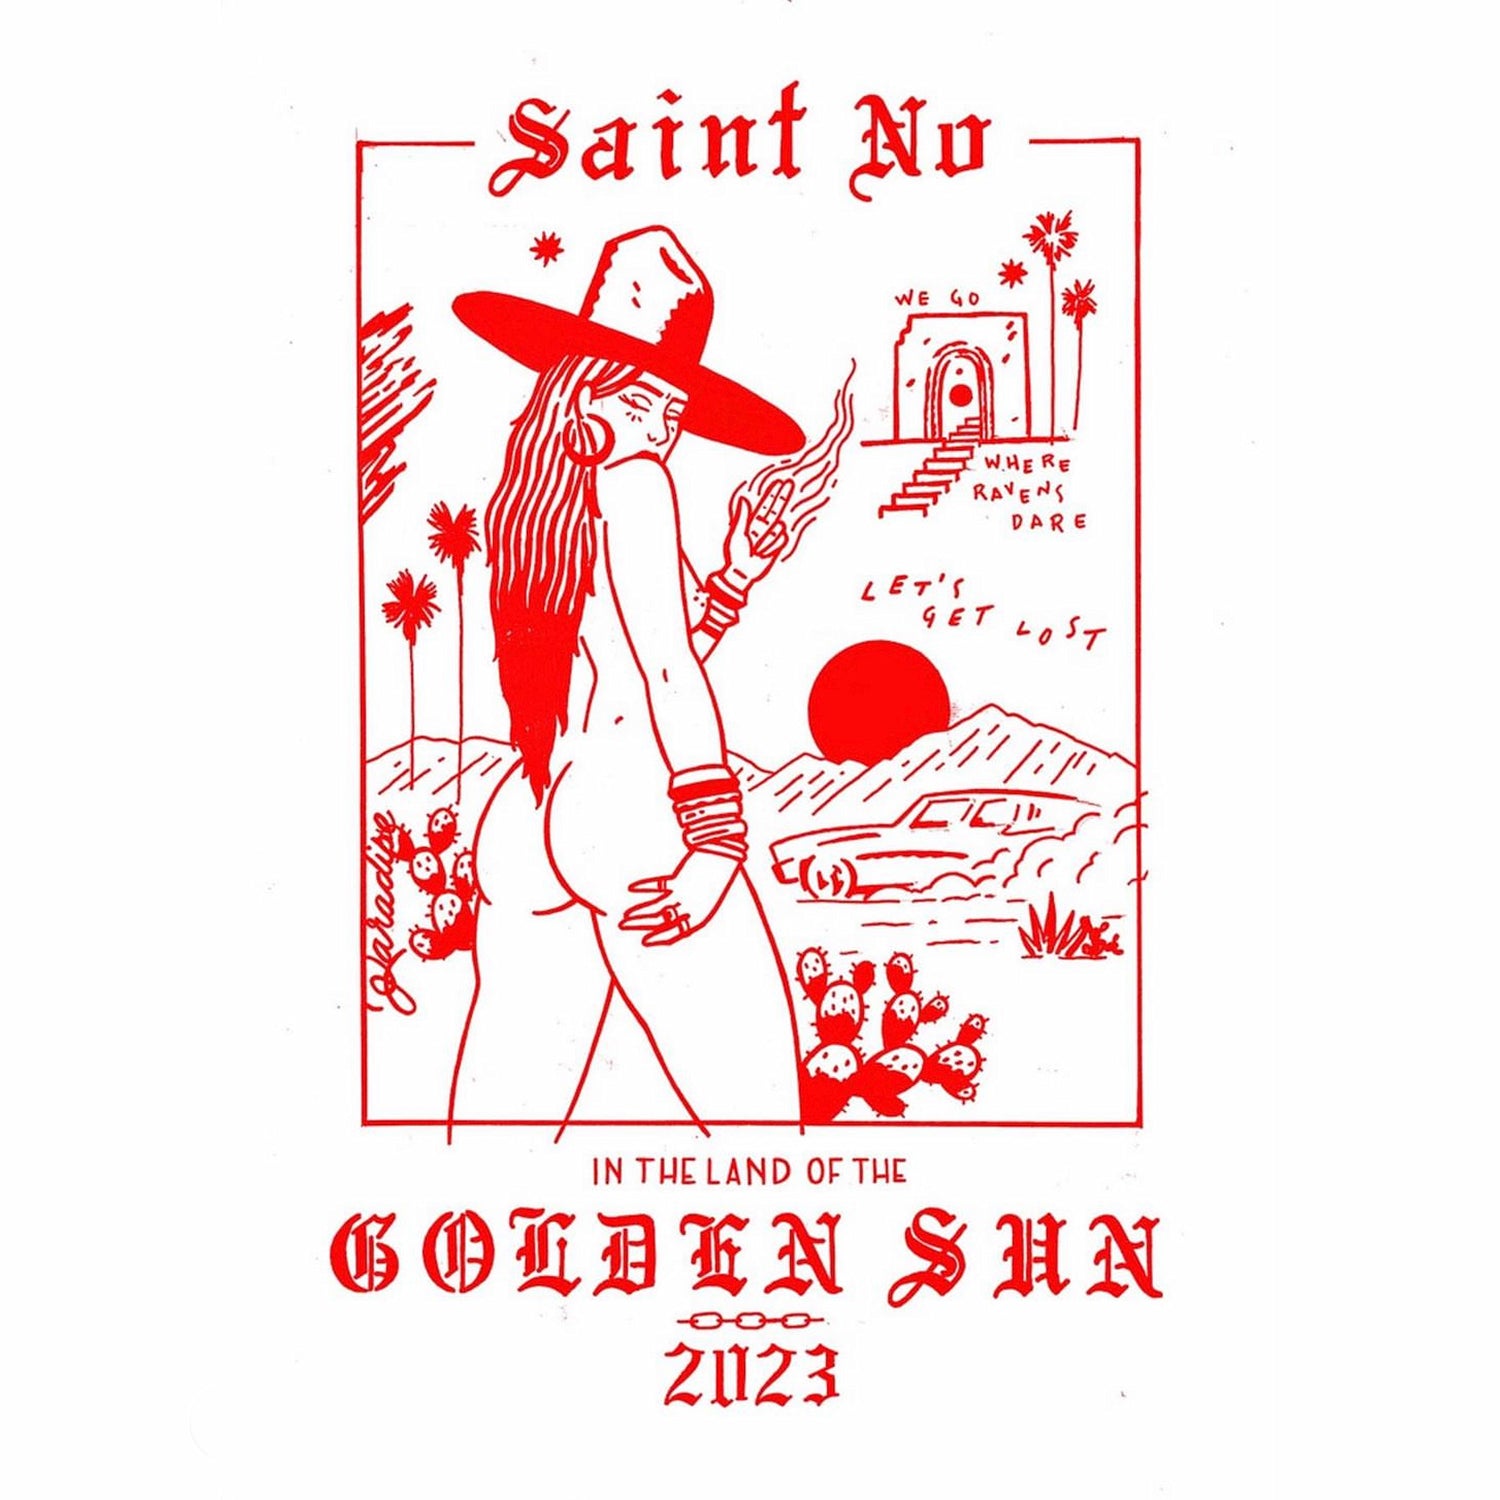 SAINT NO: "In the Land of the Golden Sun" Solo Exhibit at Market Market, Palm Springs